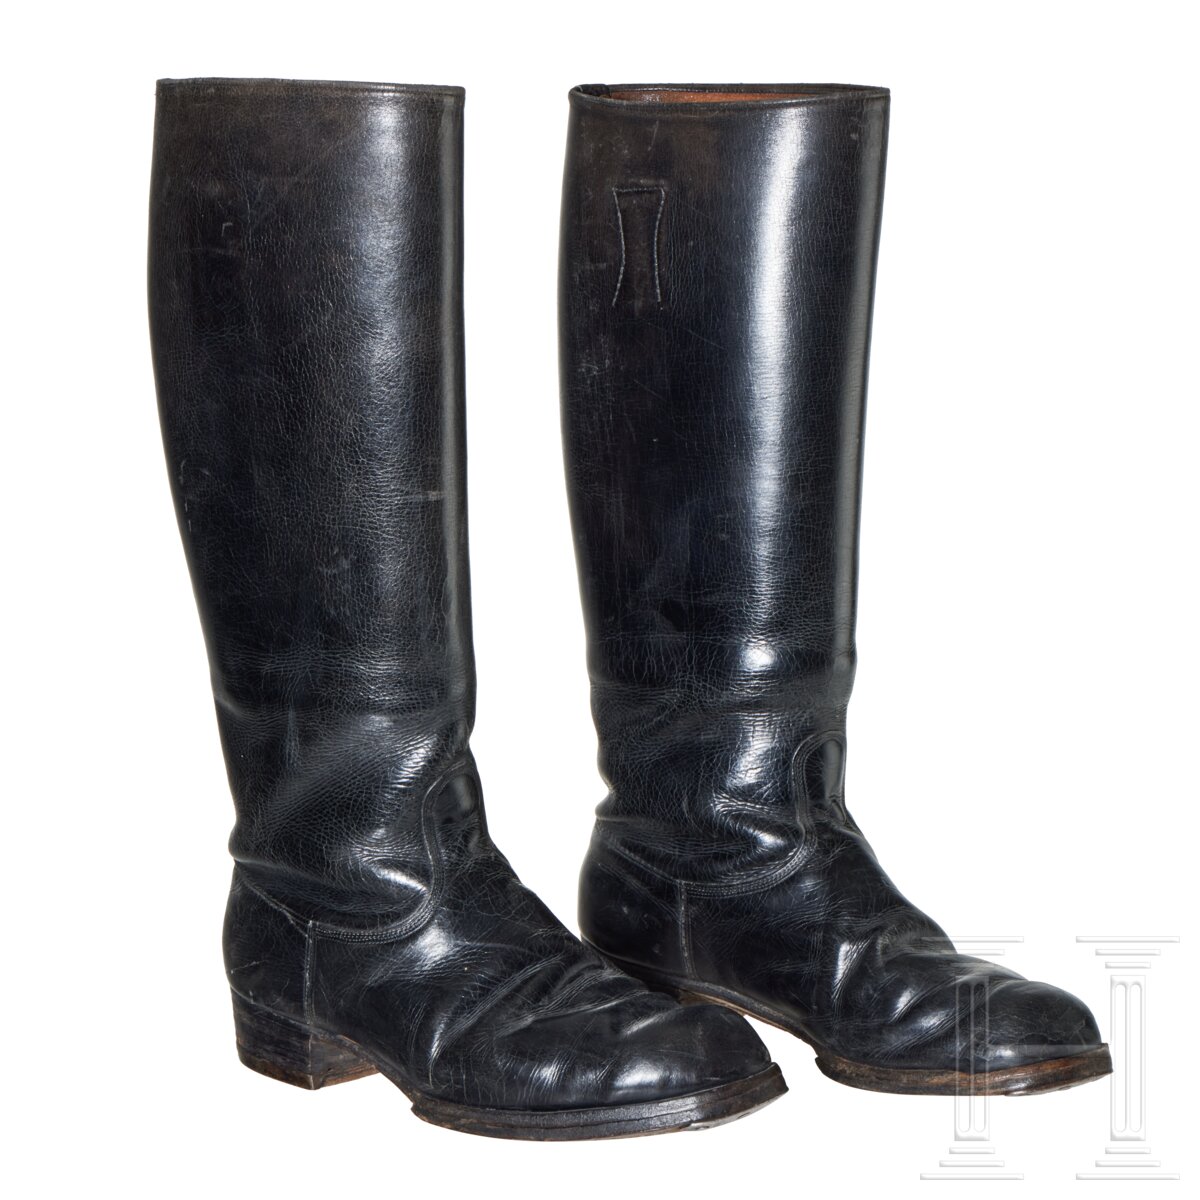 A Pair of Marching Boots for SS - Image 2 of 8